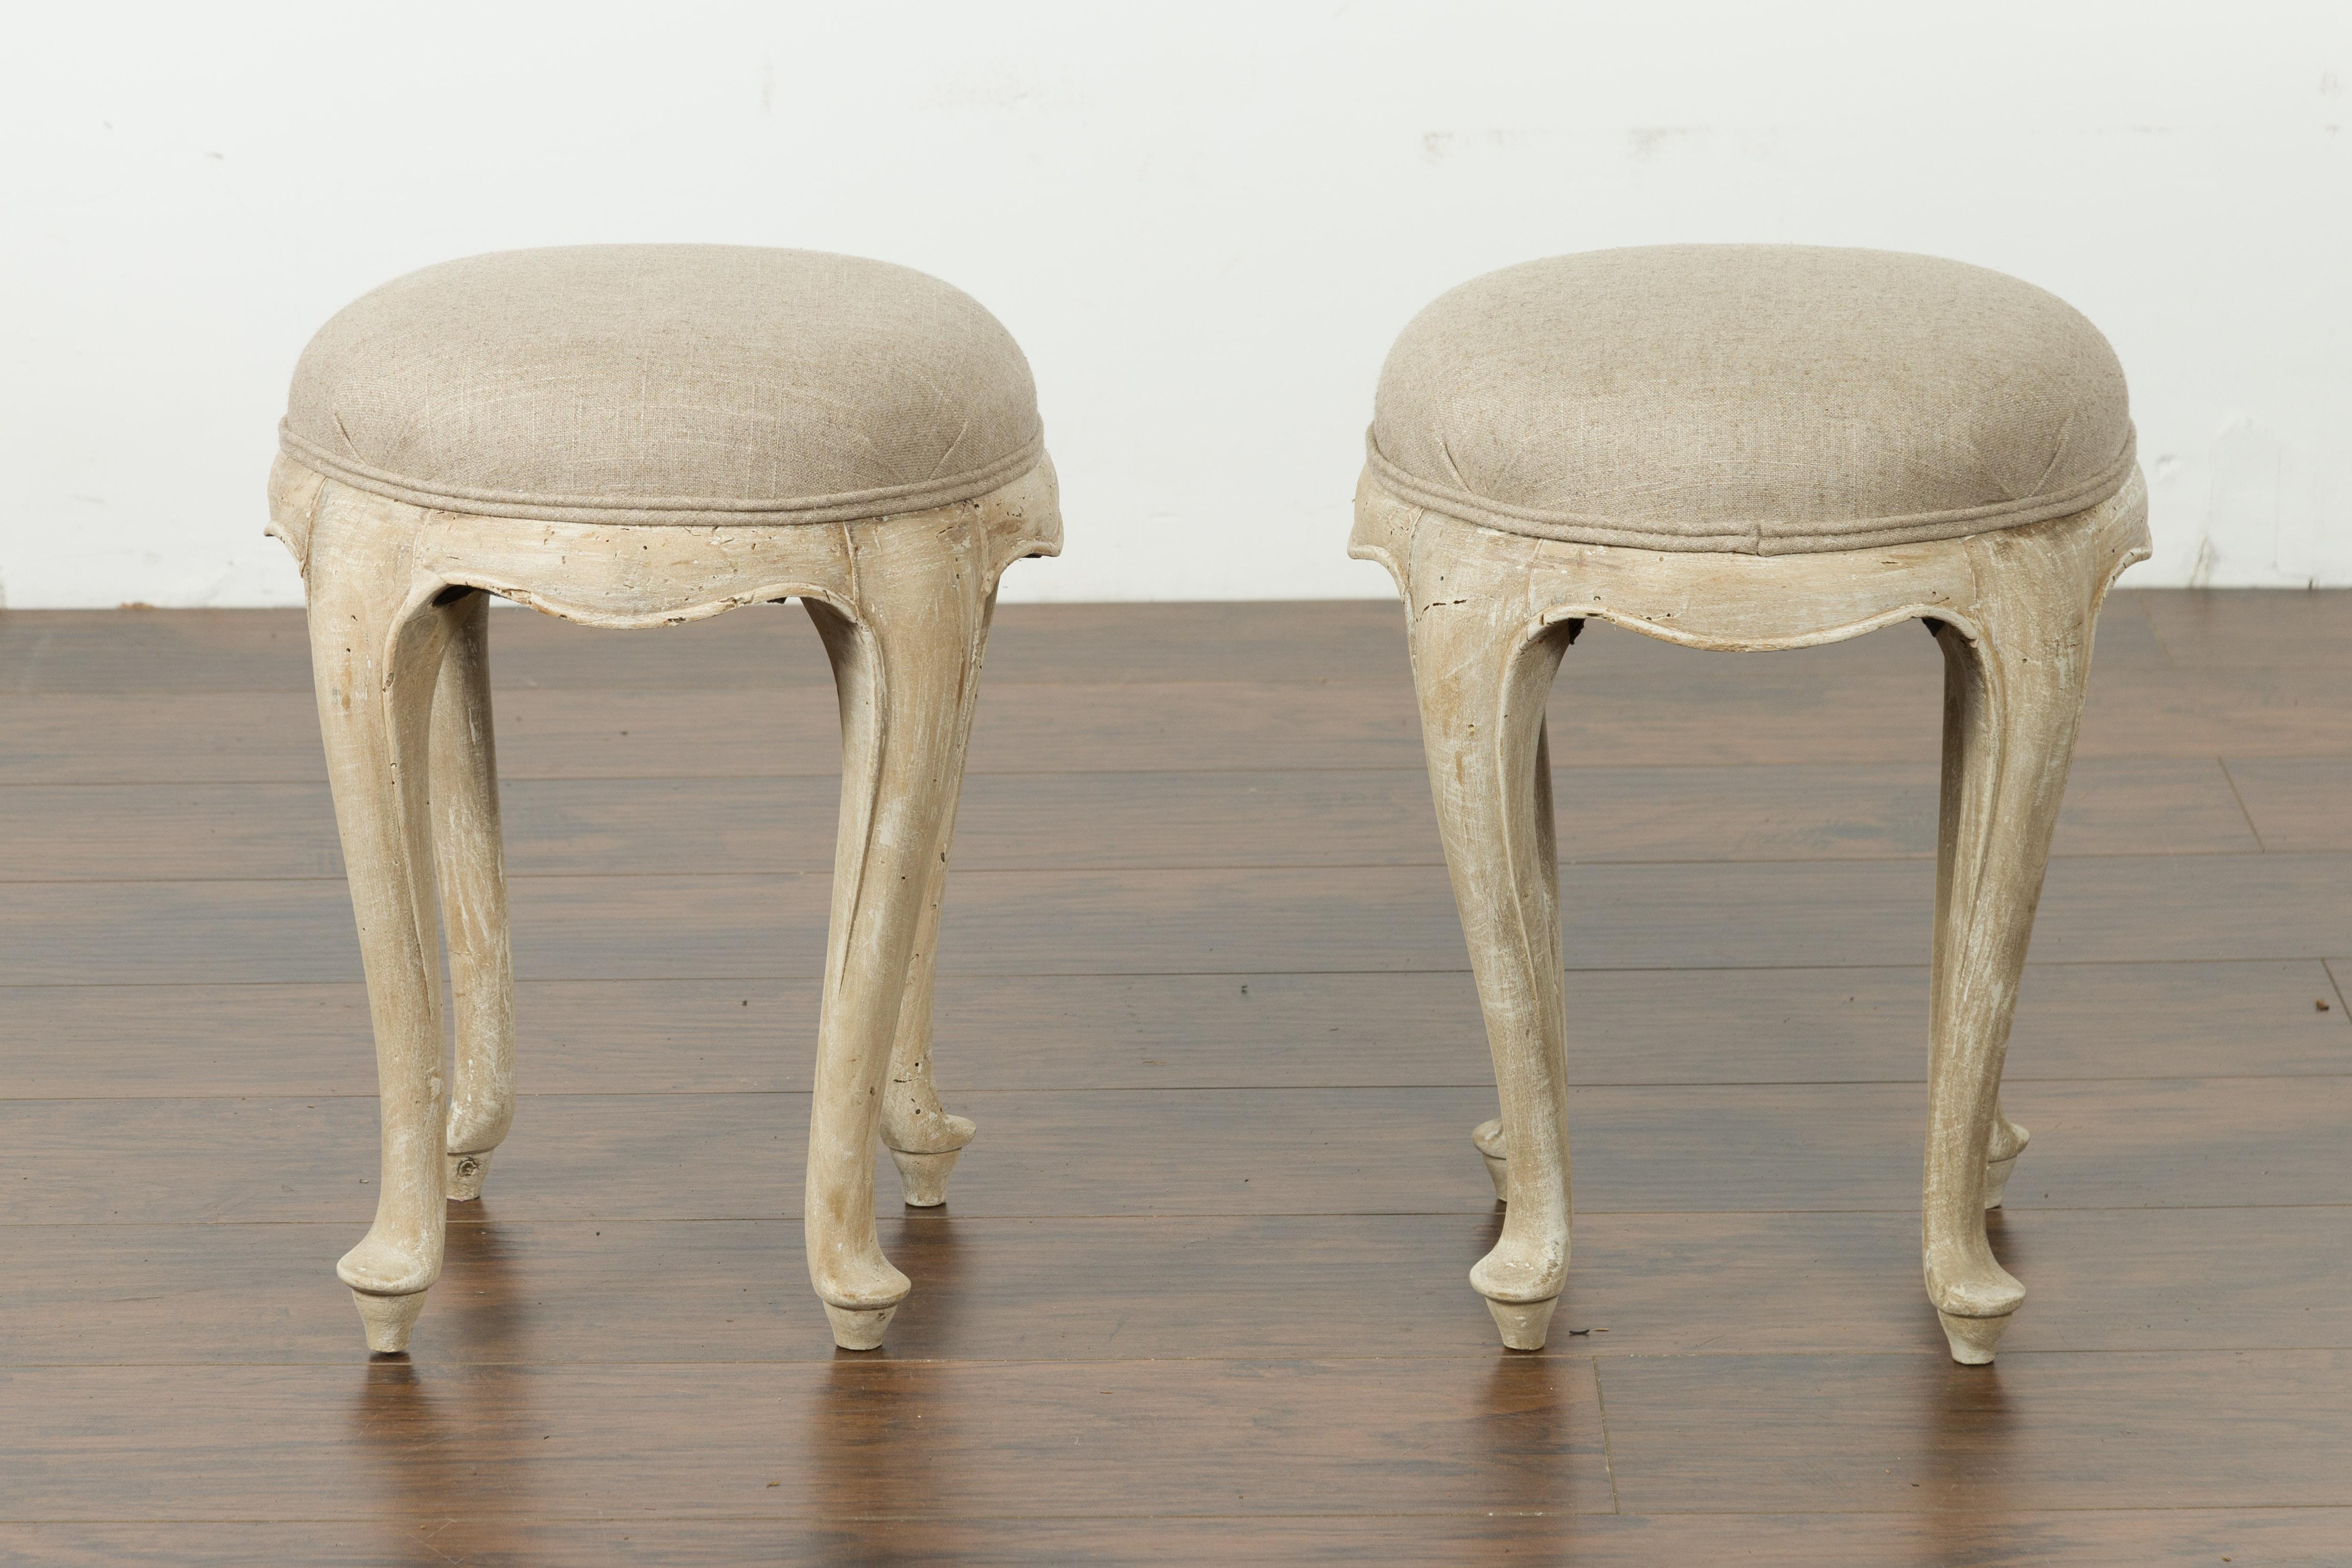 A pair of French Louis XV style walnut stools from the mid-20th century, with cabriole legs and new upholstery. Created in France during the midcentury period, each of this pair of Louis XV style stools features a circular seat newly recovered with